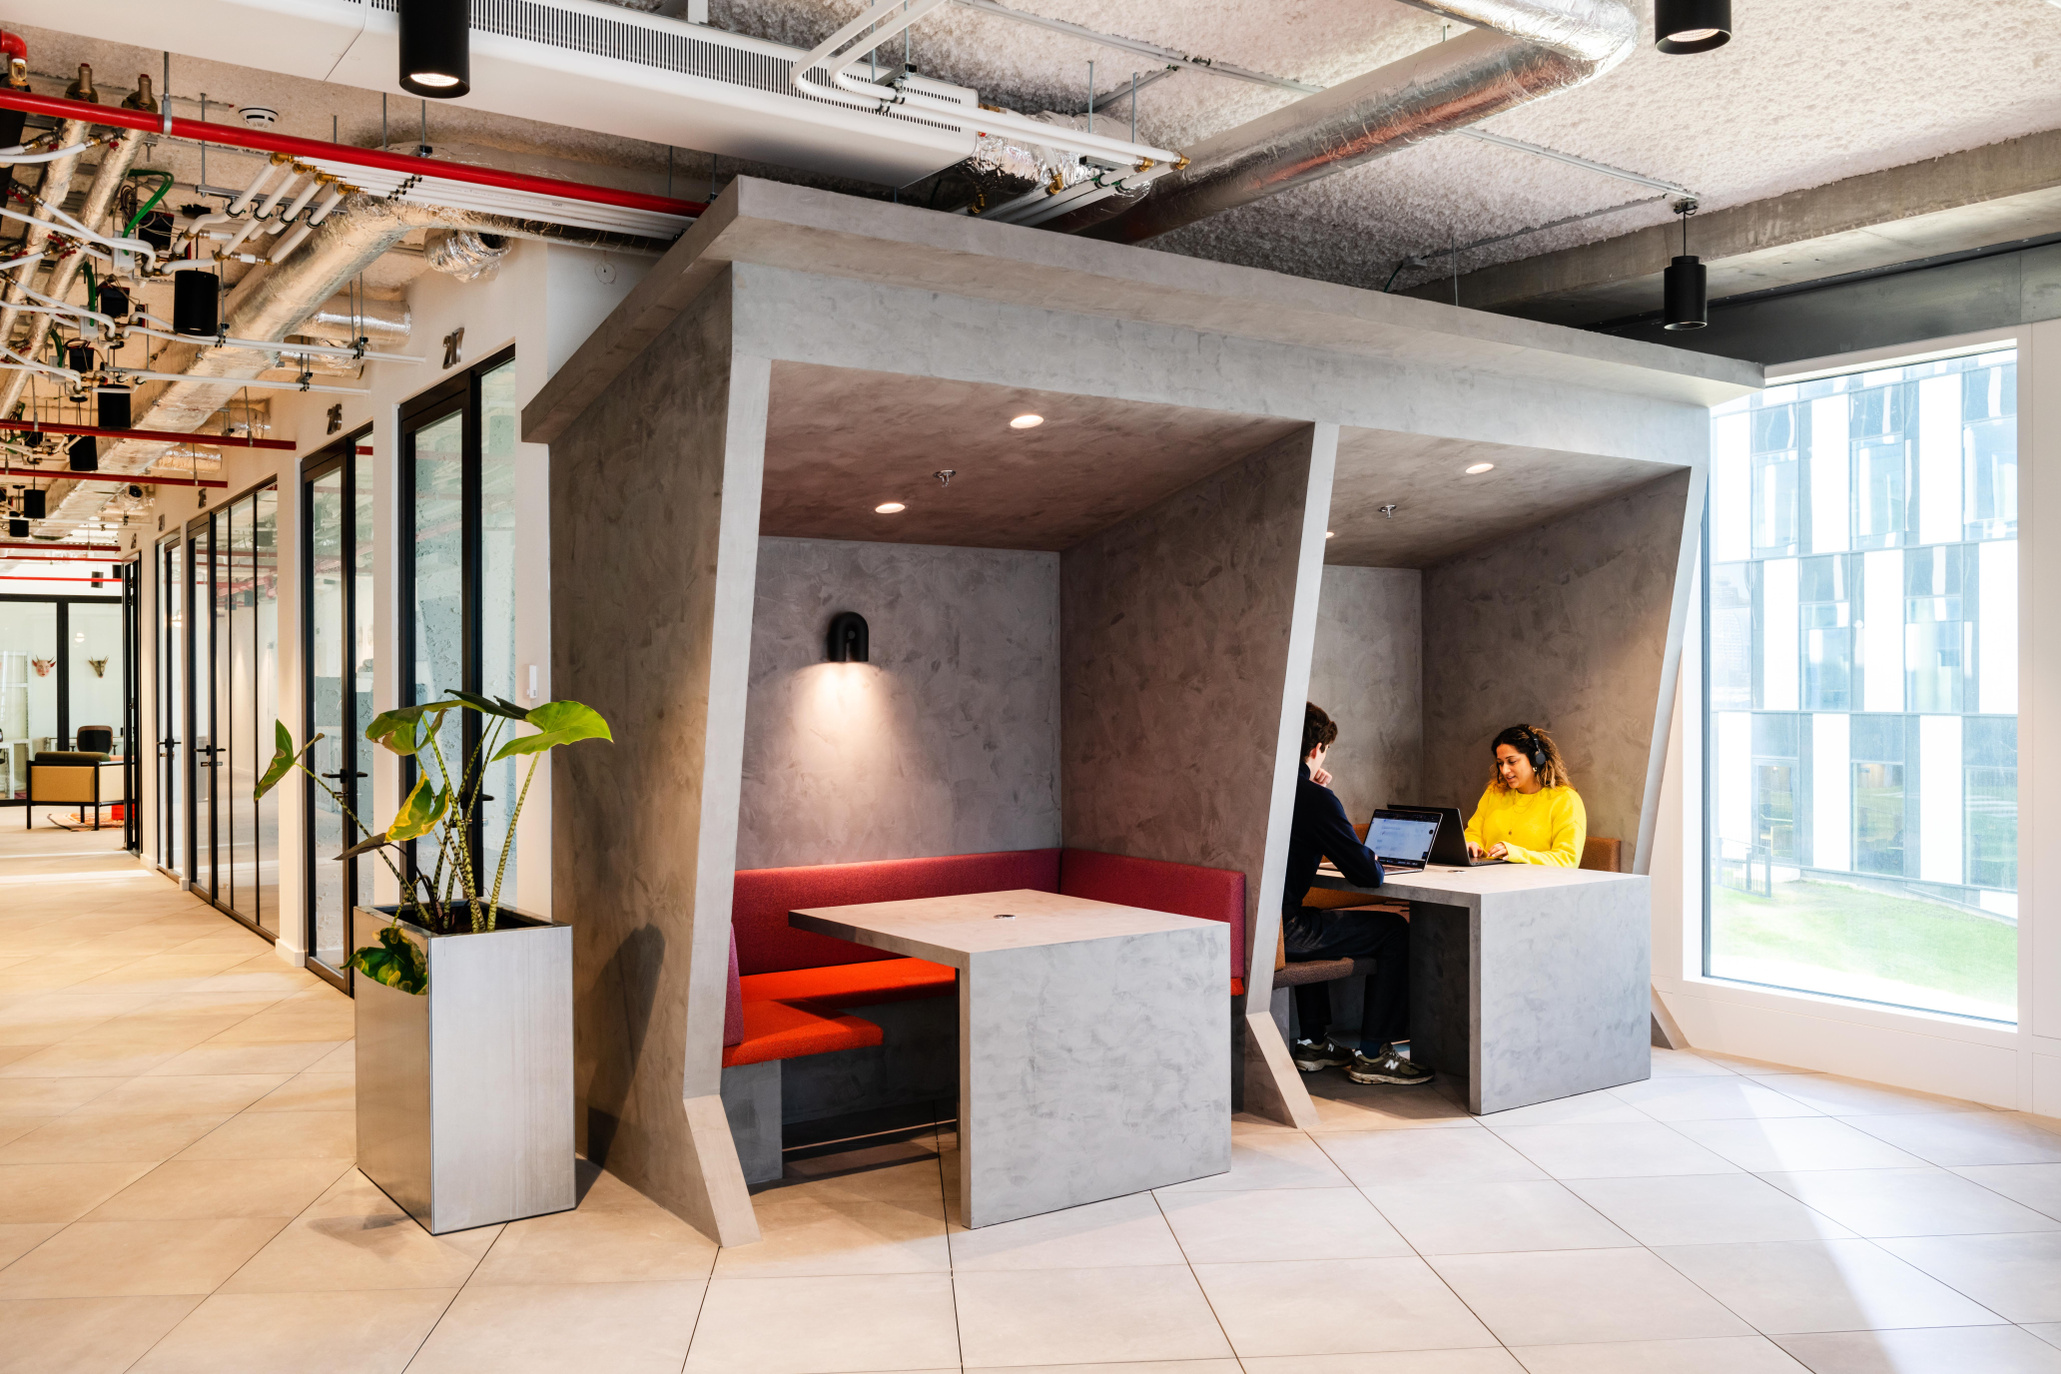 Silversquare Guillemins coworking space in Liège, Belgium embodies a mix of art and craft